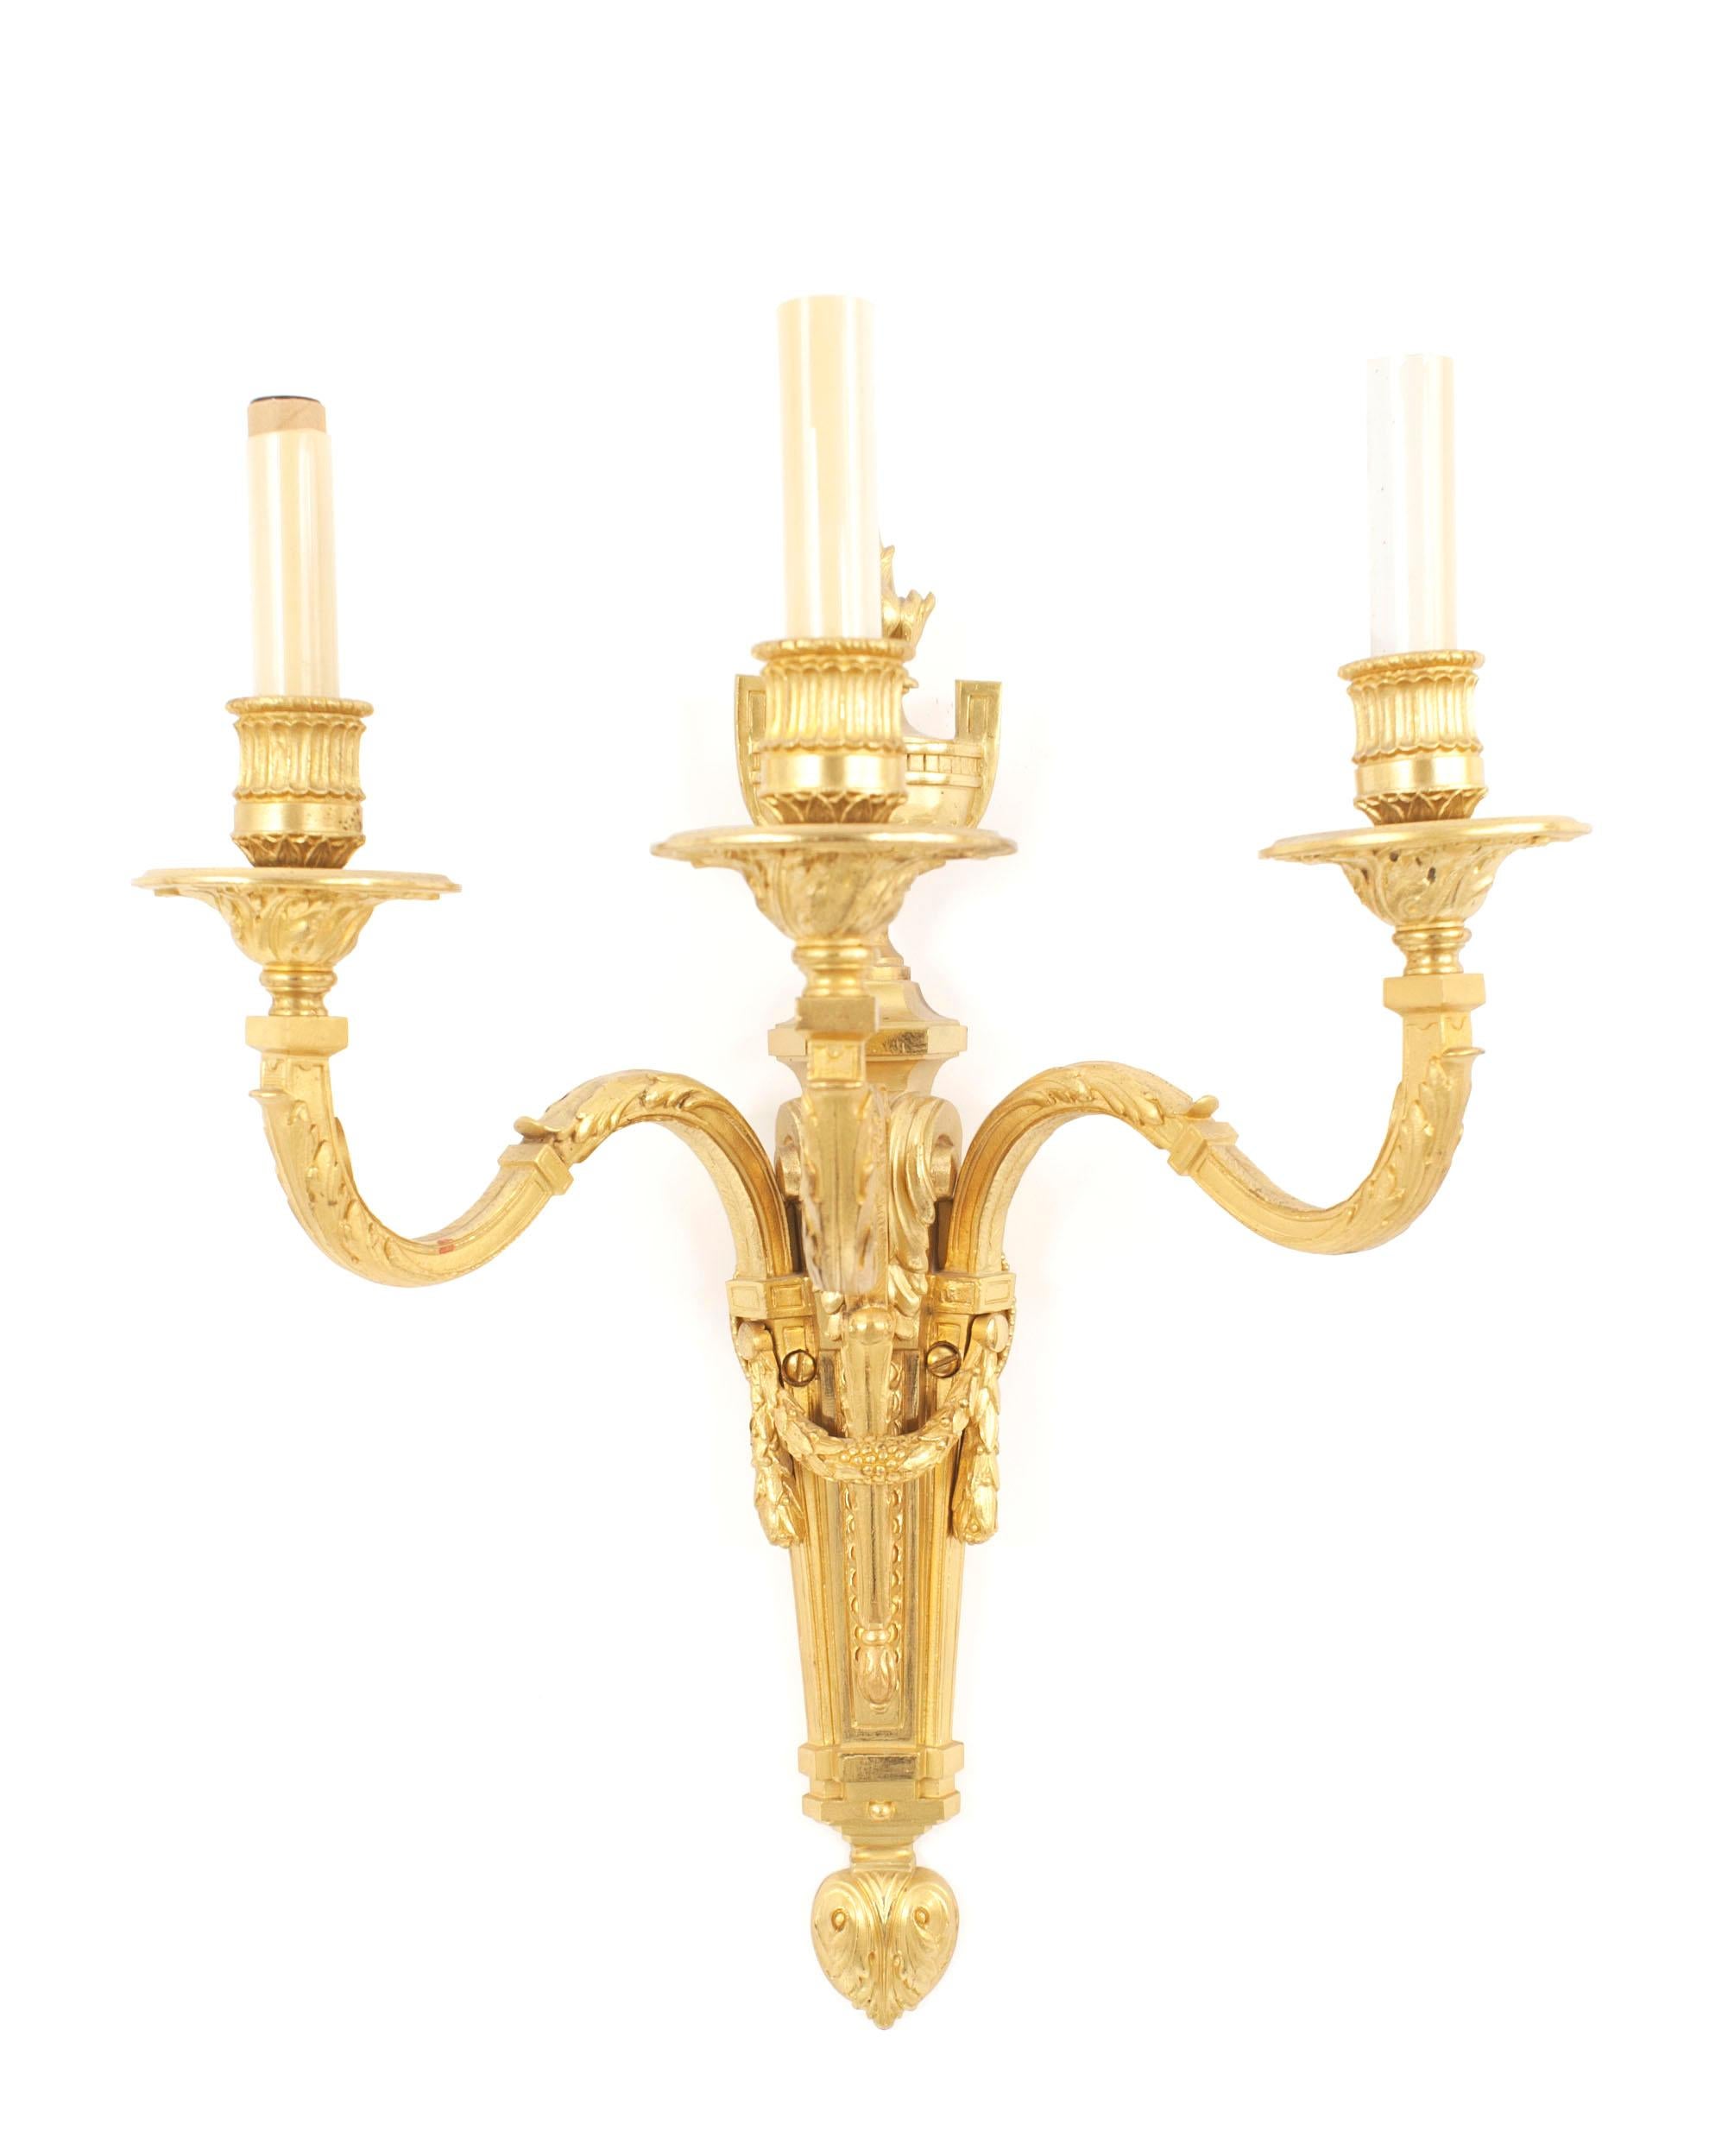 Pair of French Louis XVI style (19th Century) gilt wall sconces with three arms, urn and flame design tops, and swag centers. (PRICED AS Pair)
